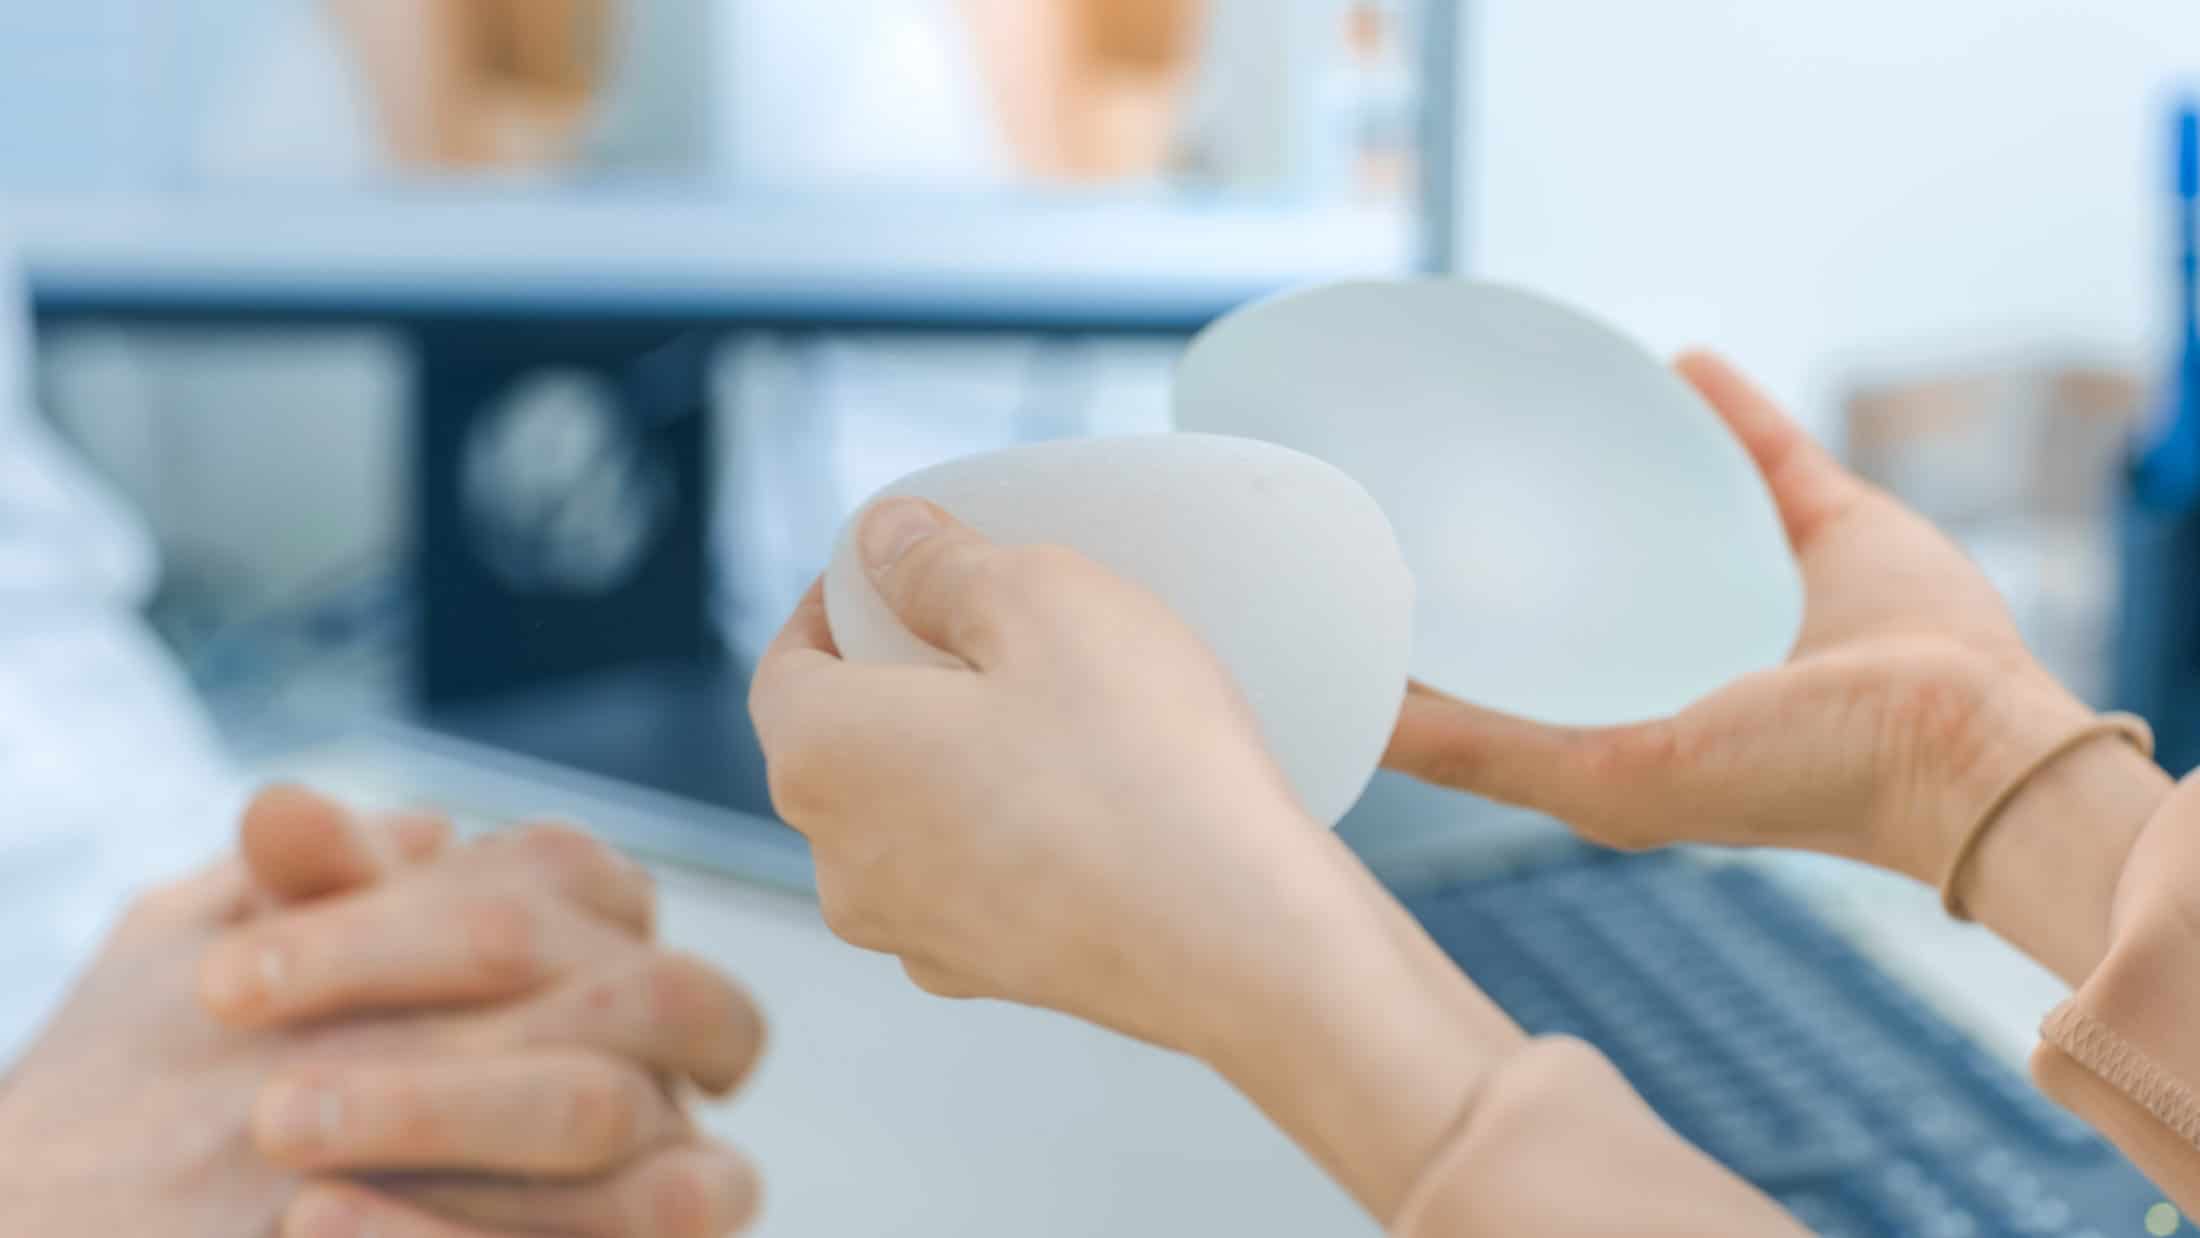 patient holding silicone breast implant in each hand